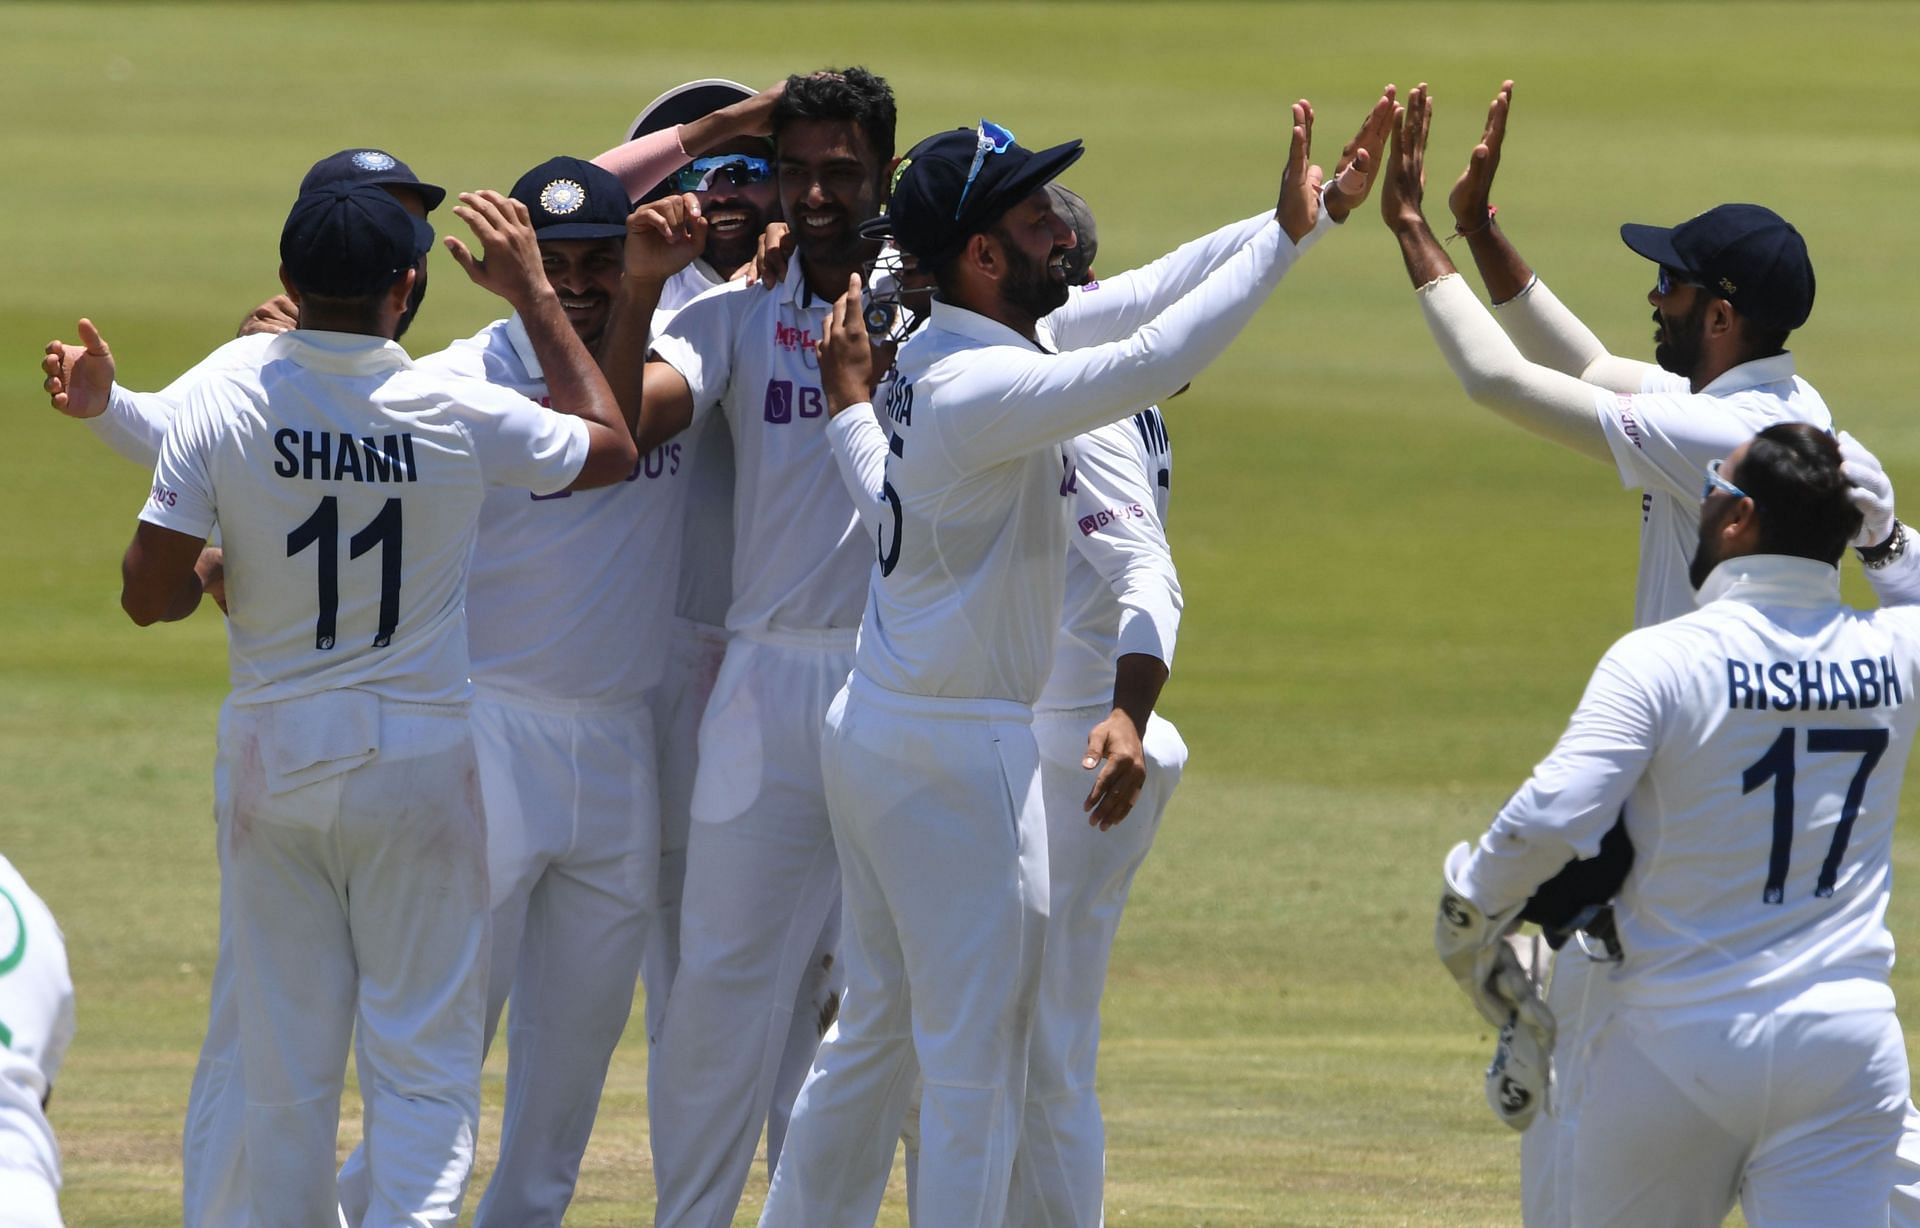 Reetinder Sodhi highlighted that Team India trounced South Africa in the first Test.